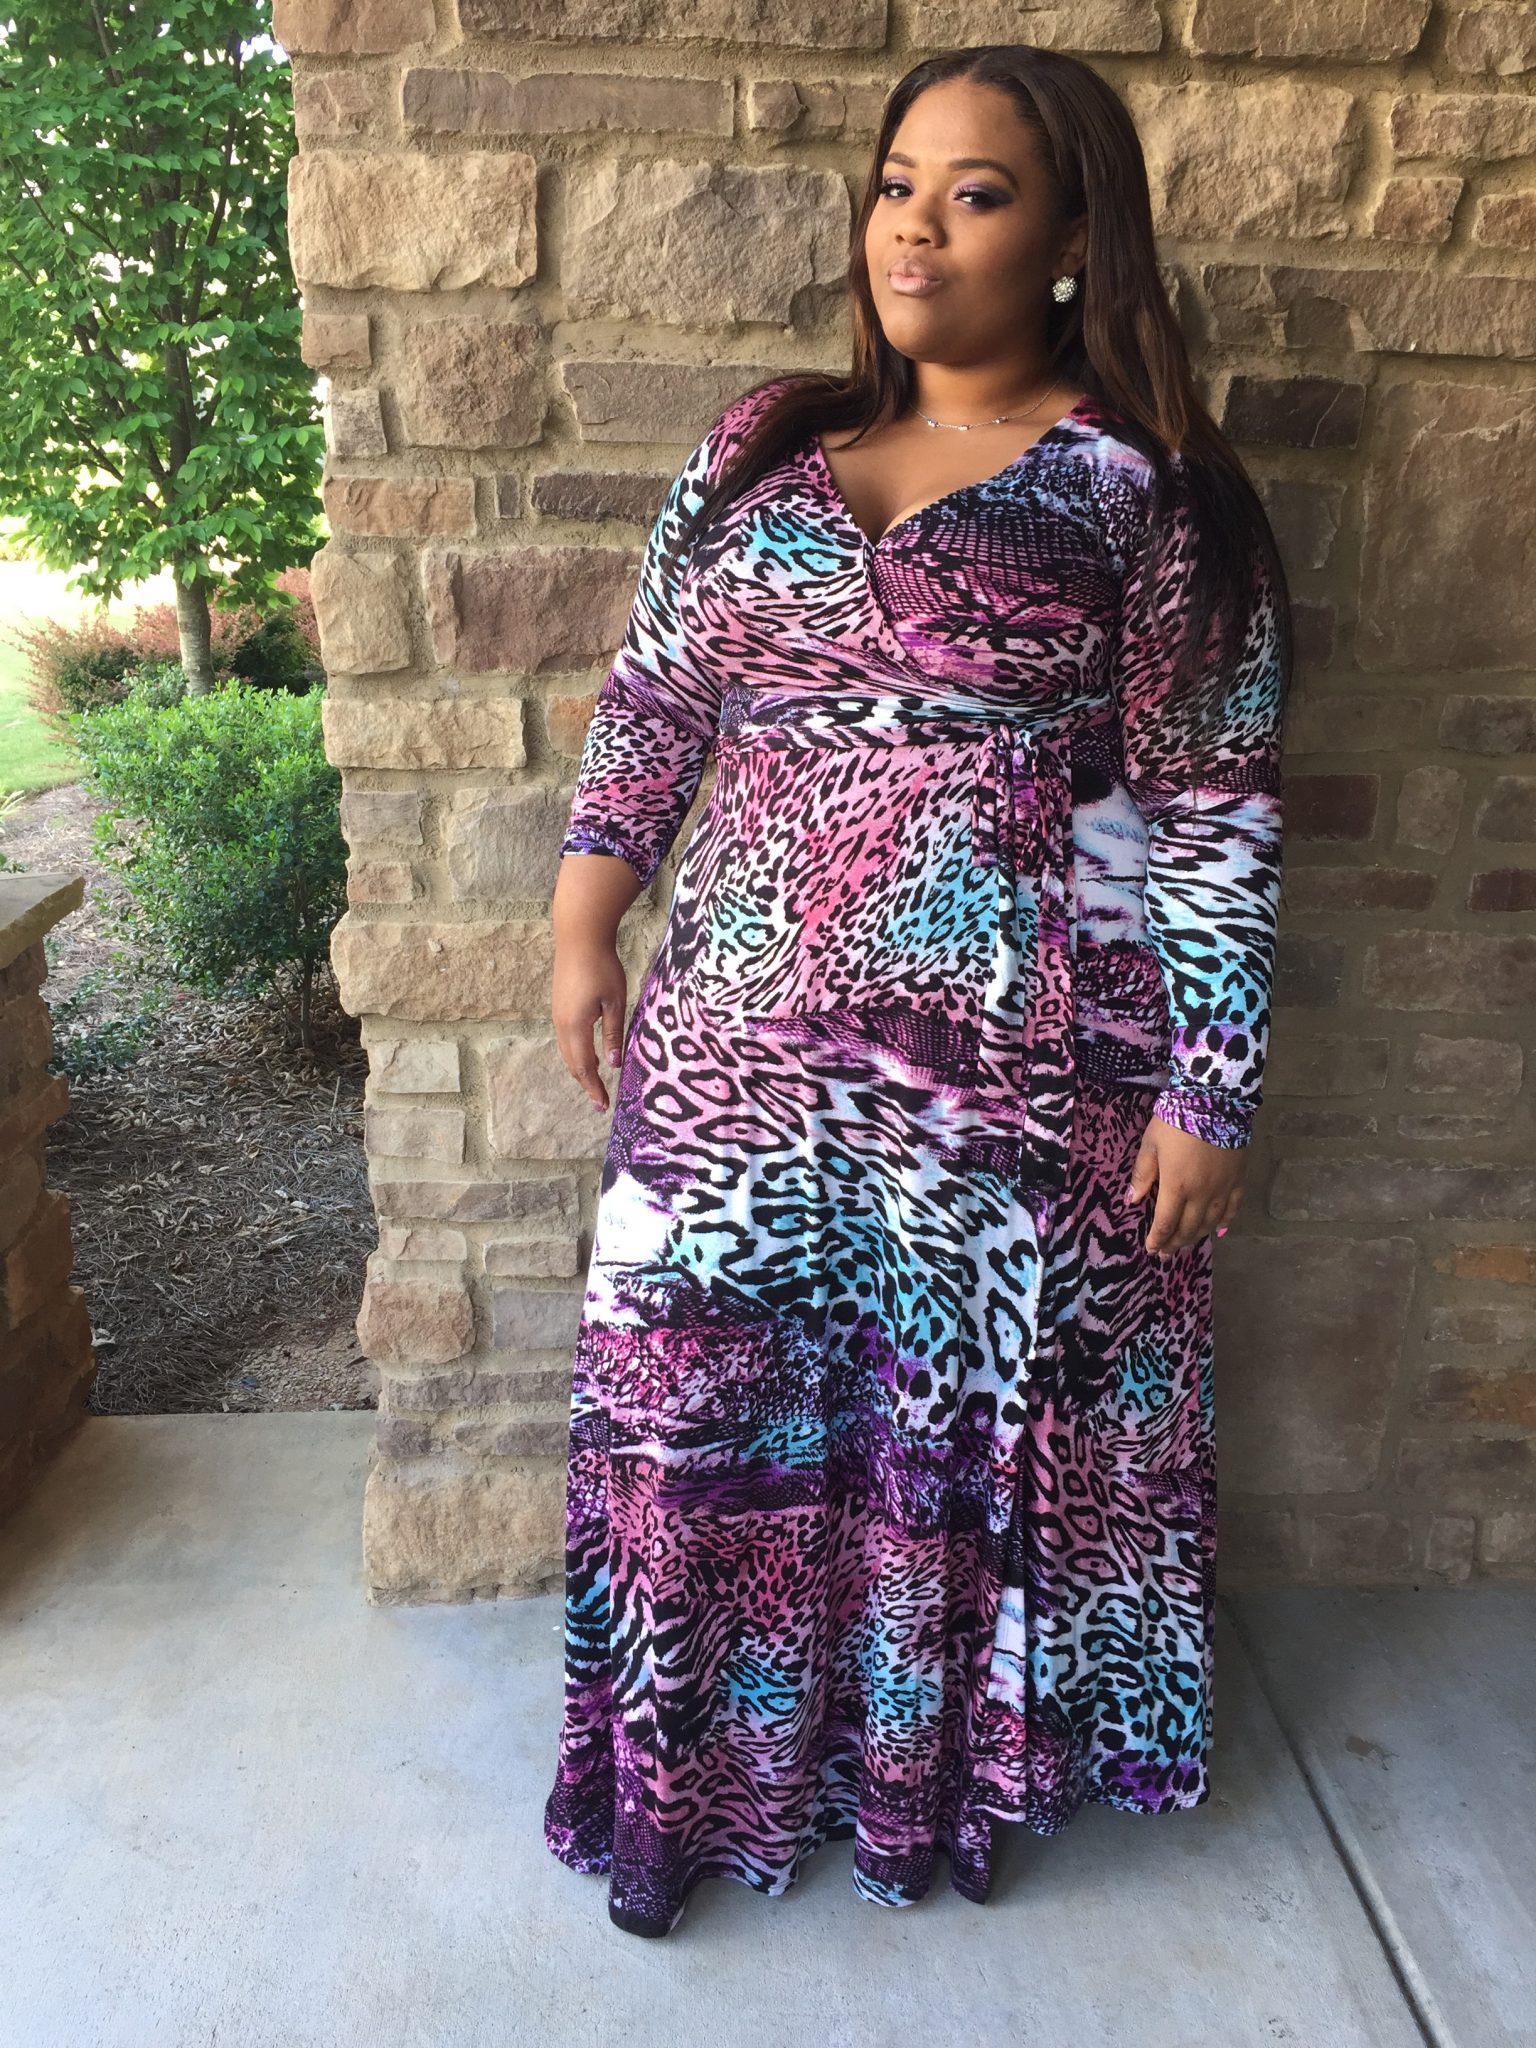 Funny Story: Dootie In My Multi Colored Animal Print Wrap Dress